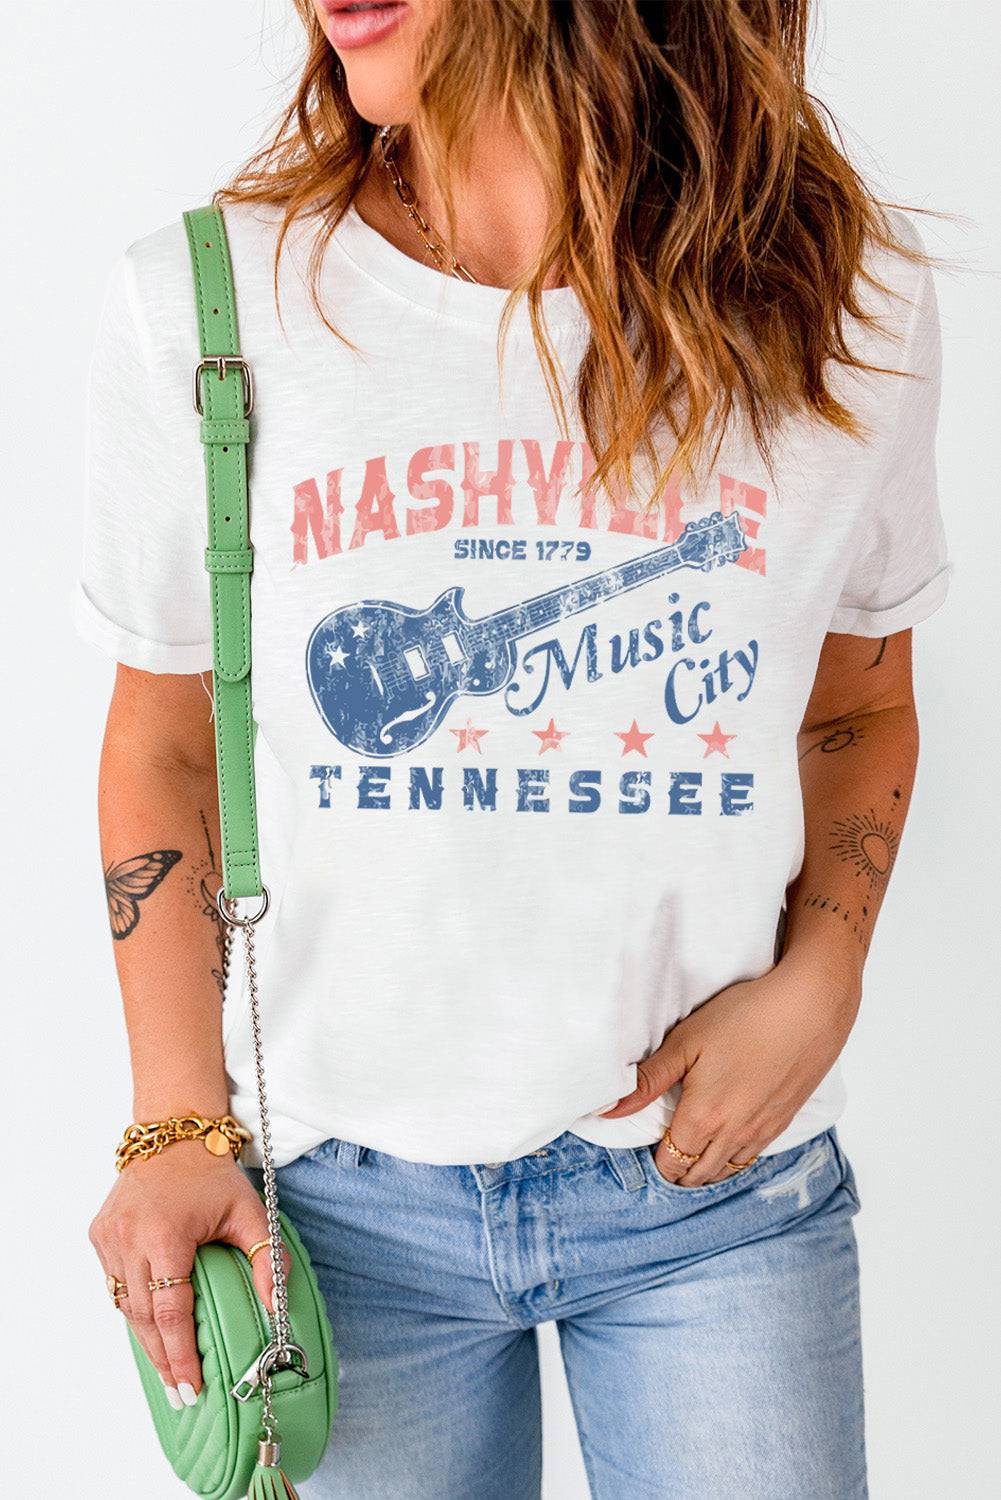 "Enchanting Nashville: Let Your Heart Sing with the Tennessee Guitar Tee - Experience Romance and Soulful Style in Every Note" - Guy Christopher